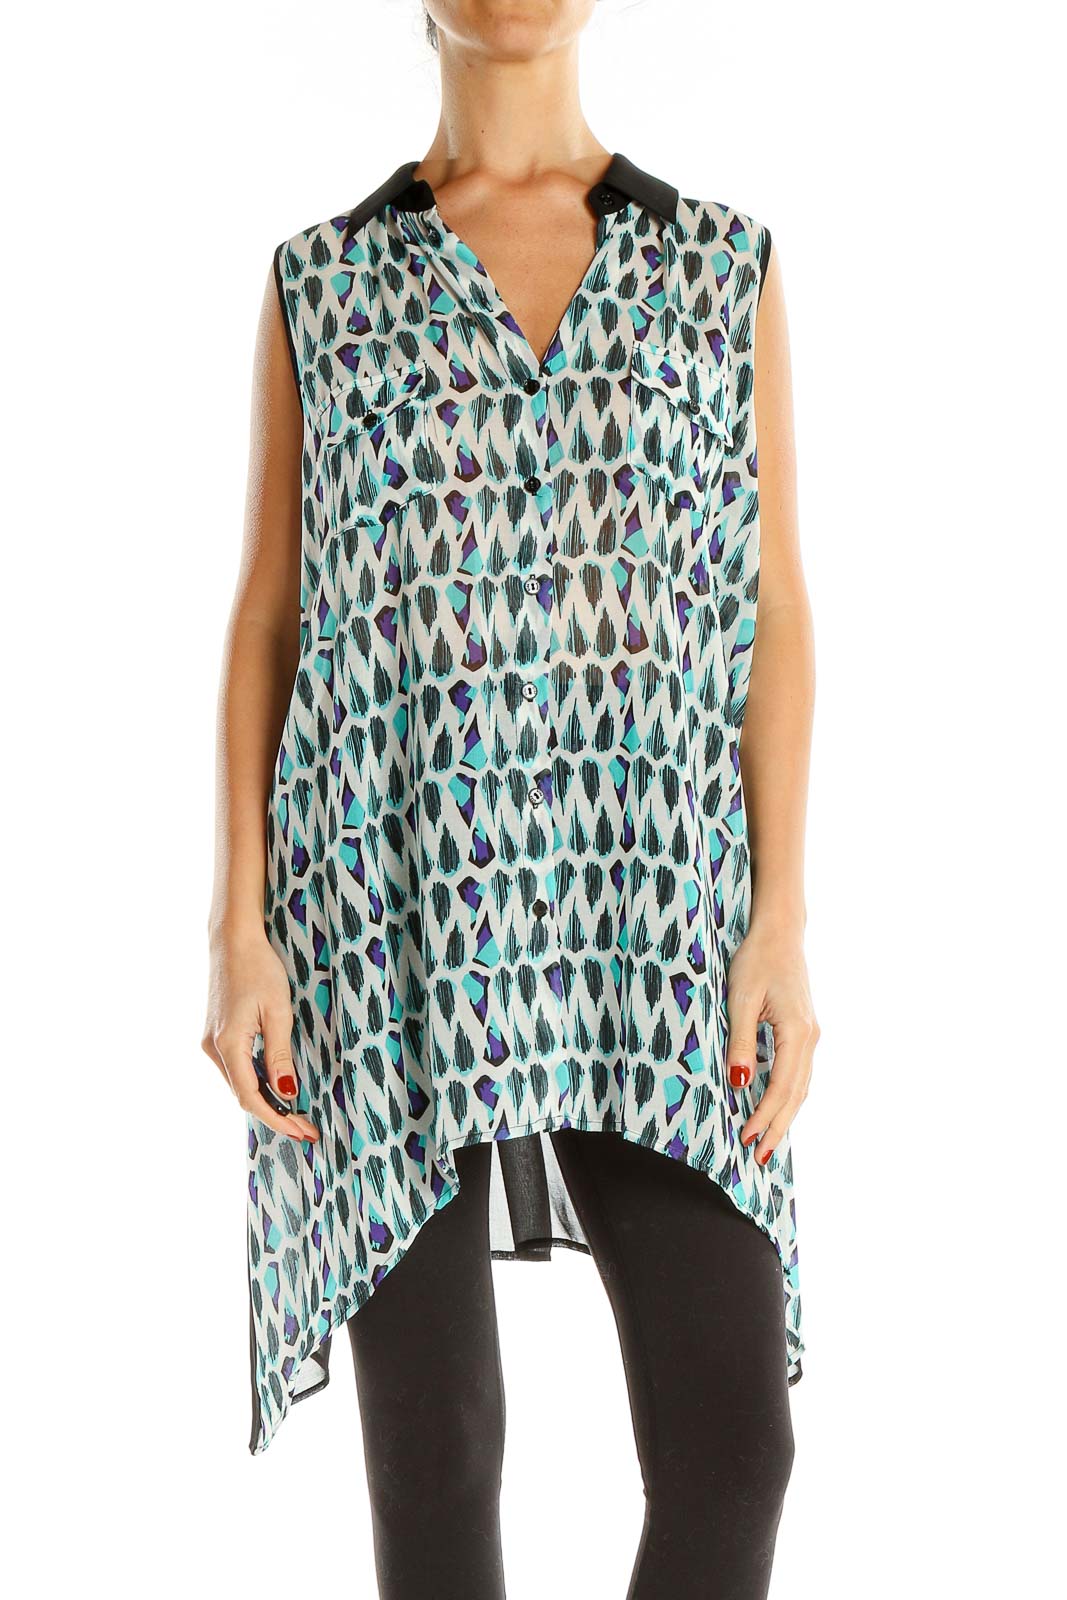 Blue Printed Long Chic Blouse Front